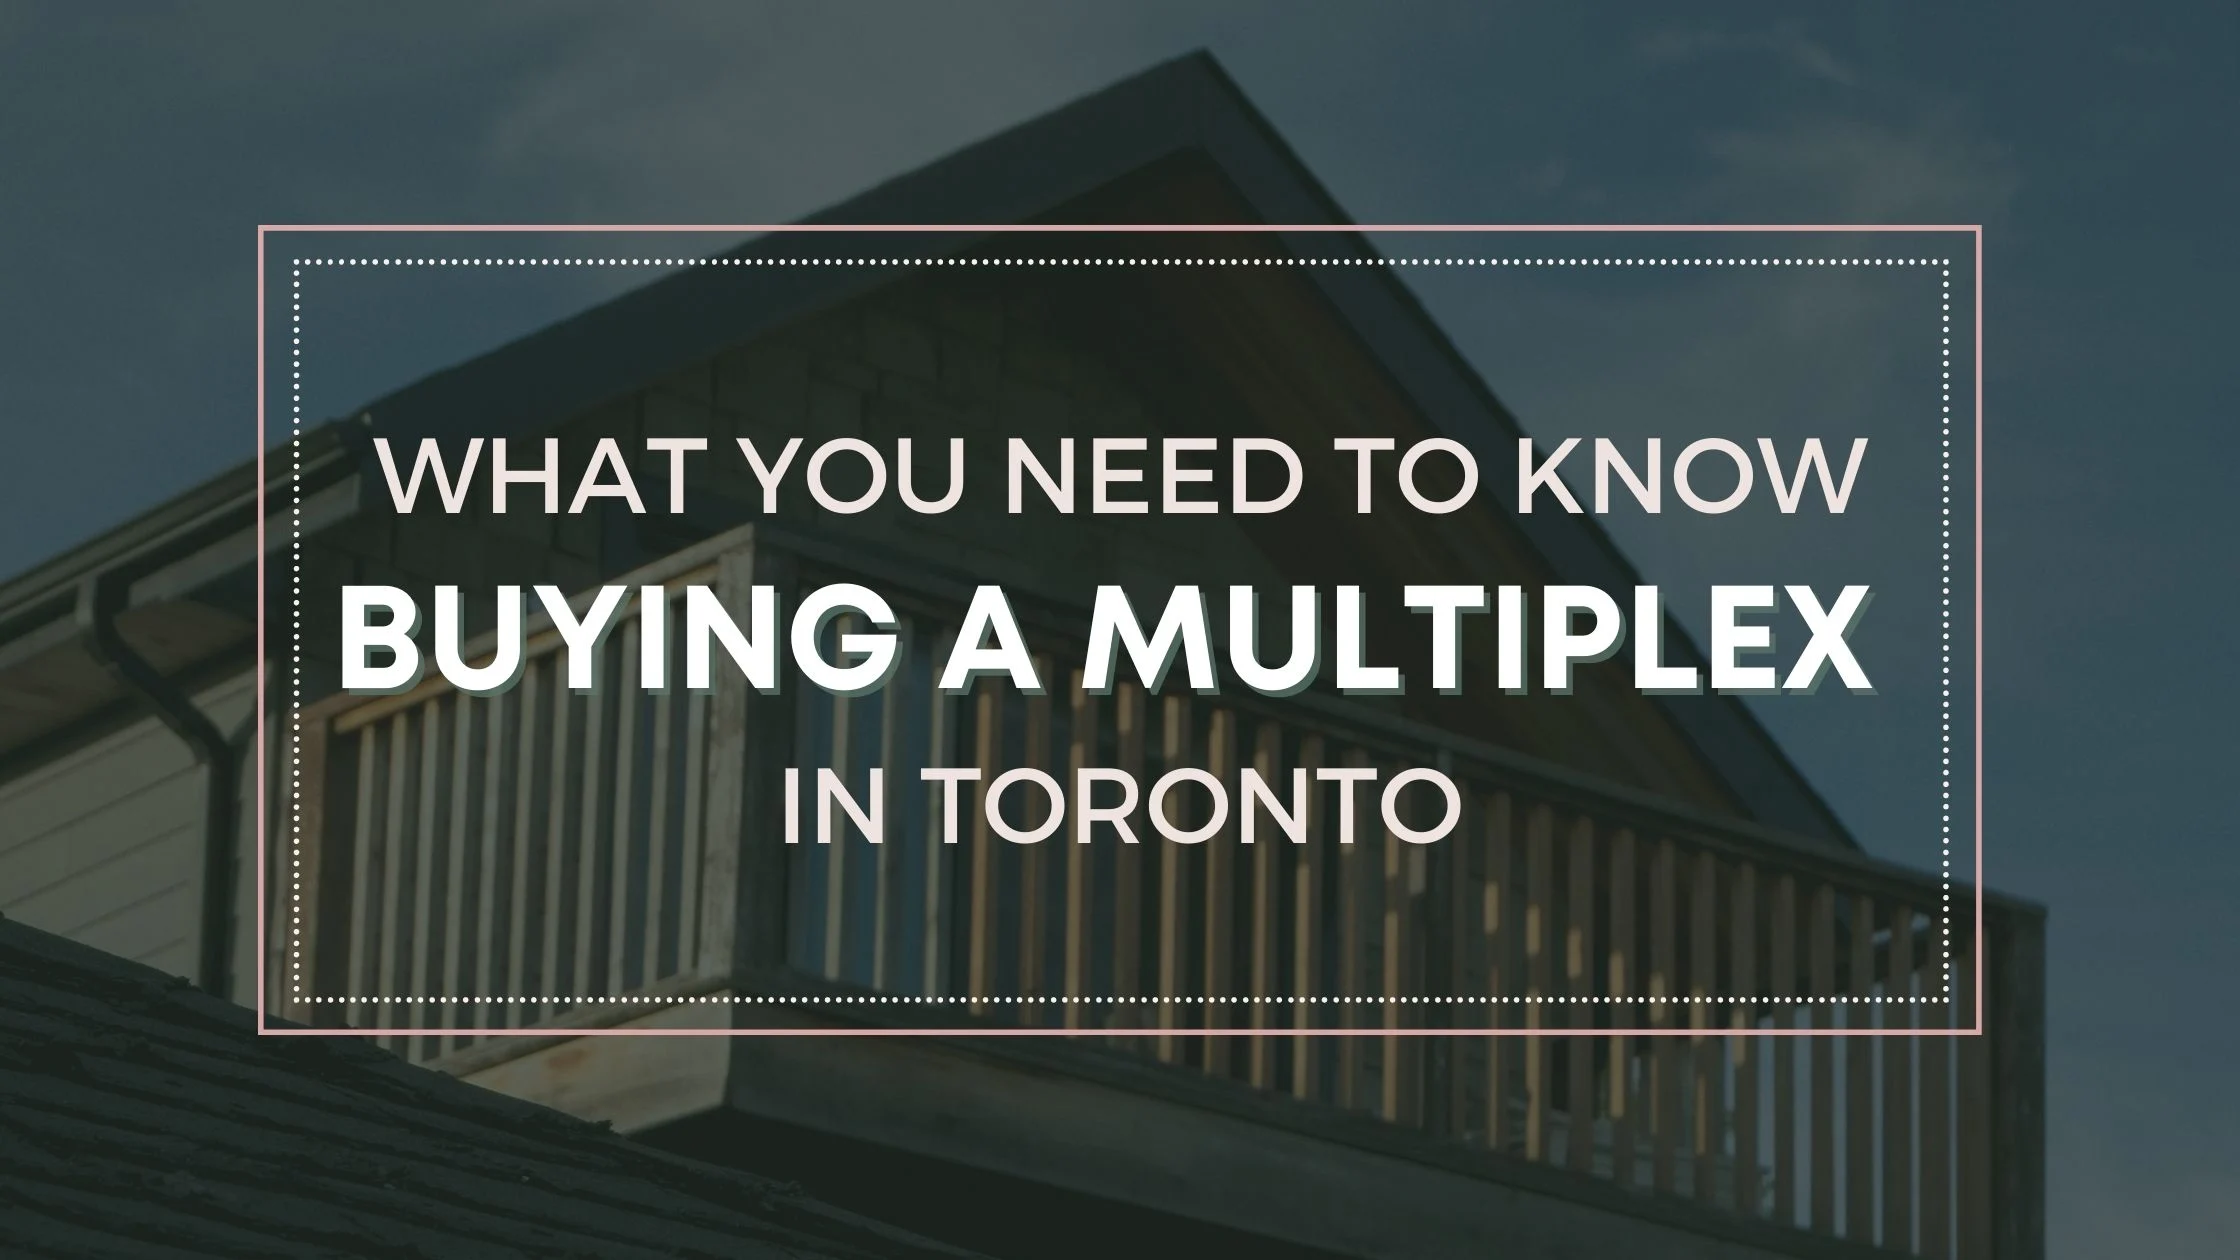 Buying a multiplex in toronto